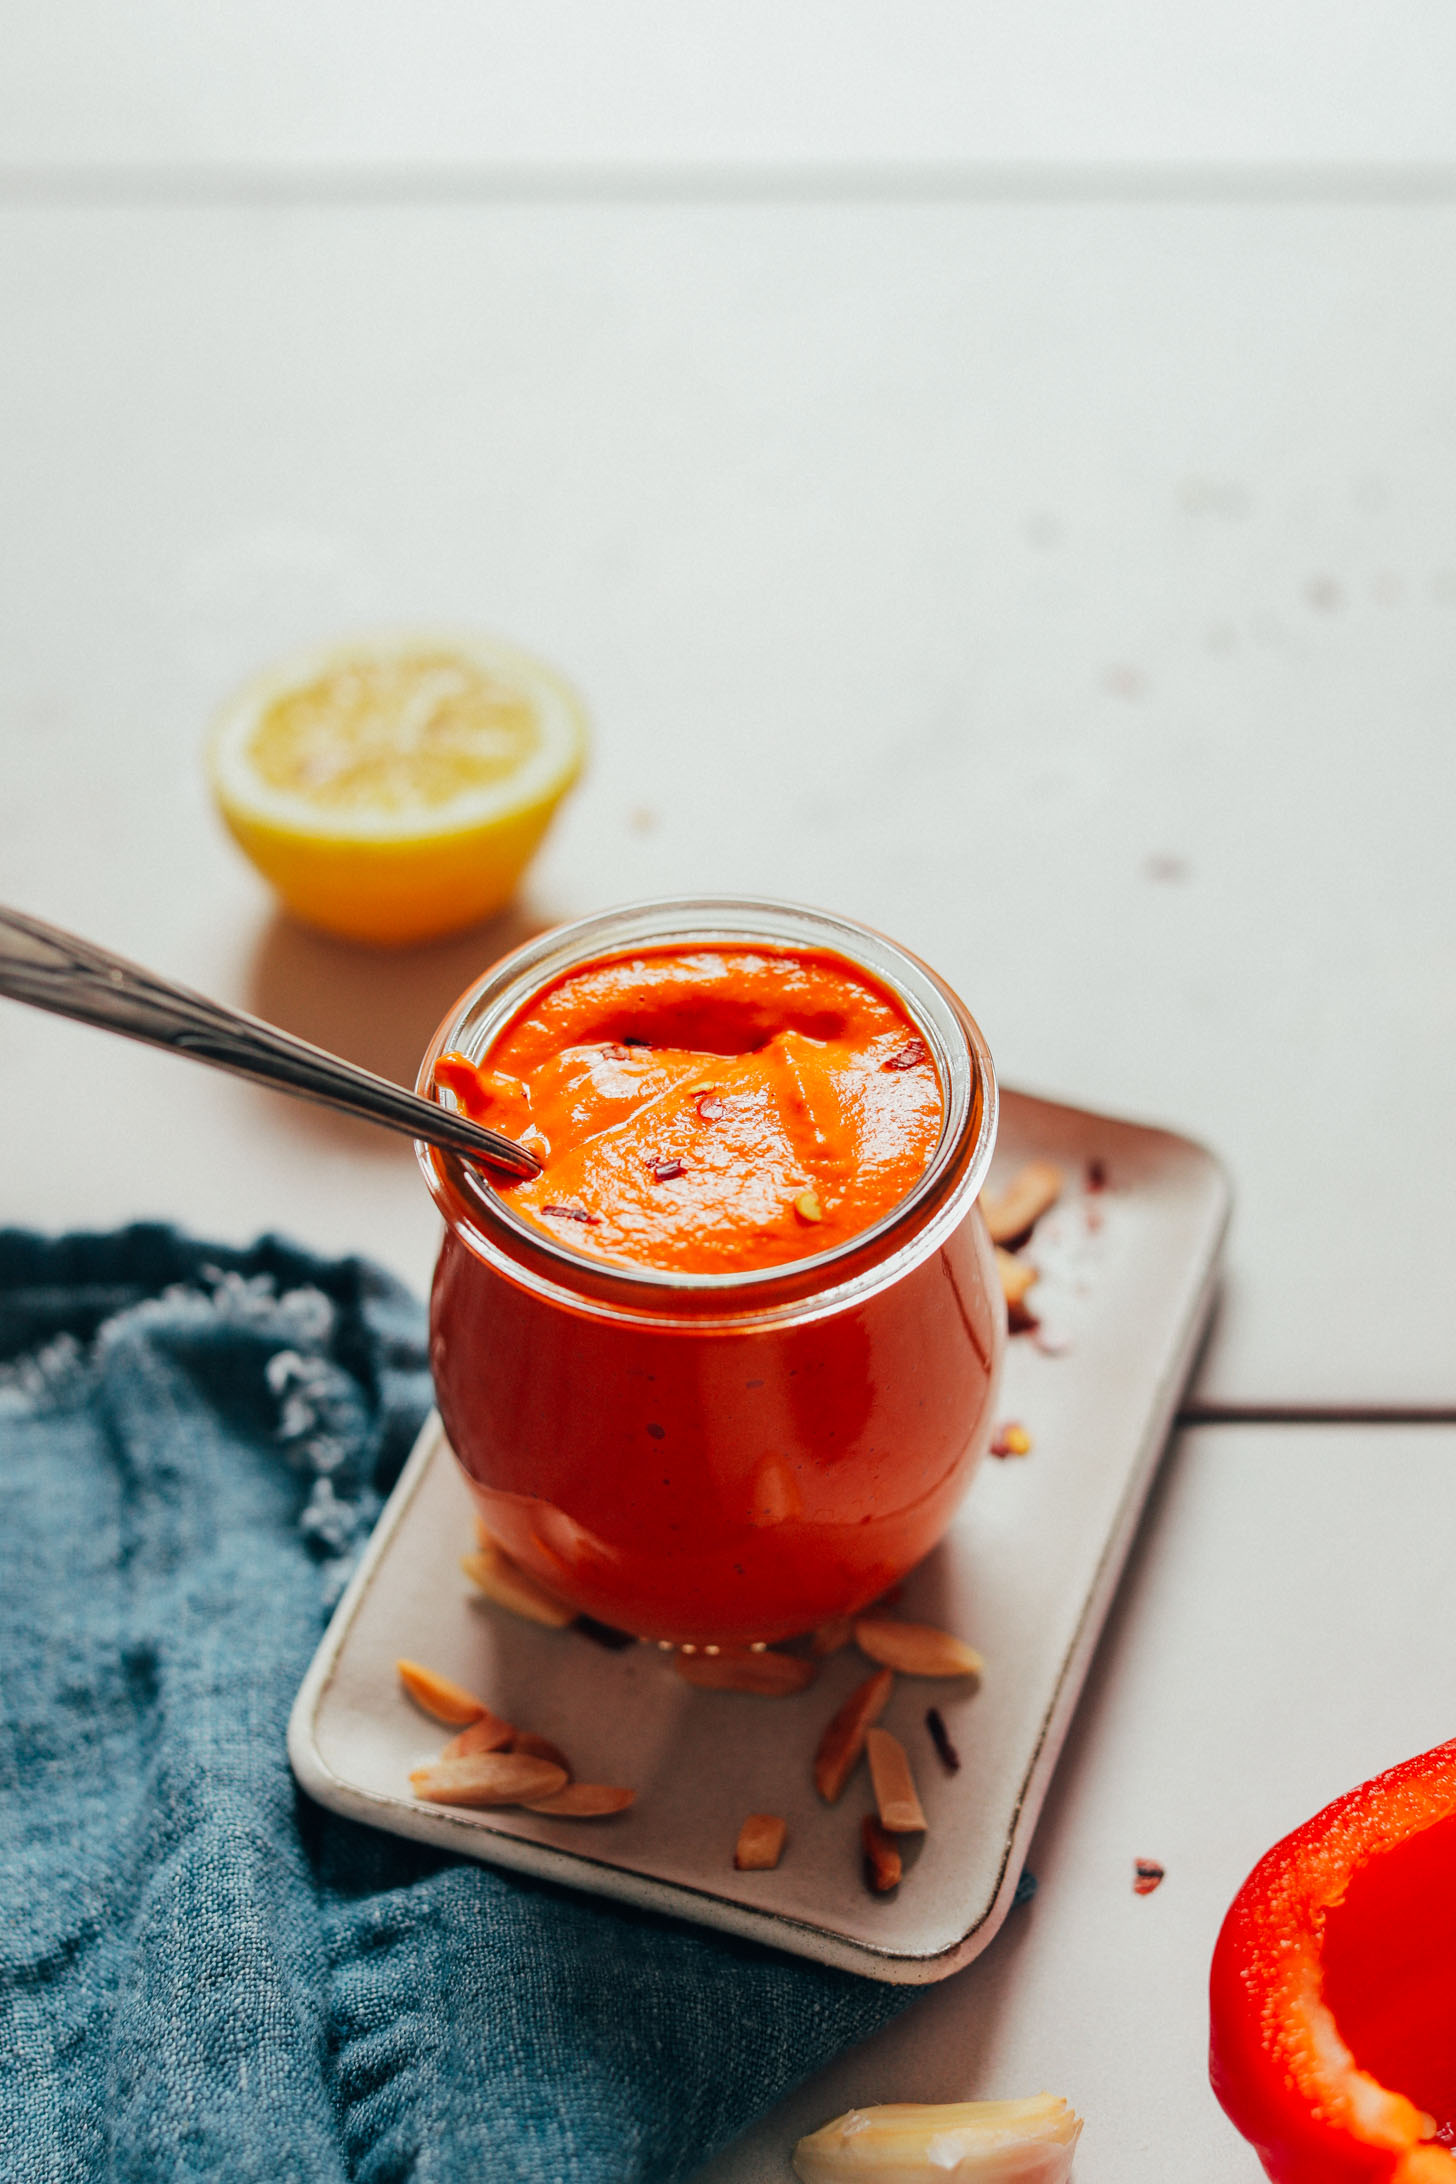 Spoon submerged in a jar of Creamy Romesco Sauce made with toasted almonds, lemon, and red bell pepper